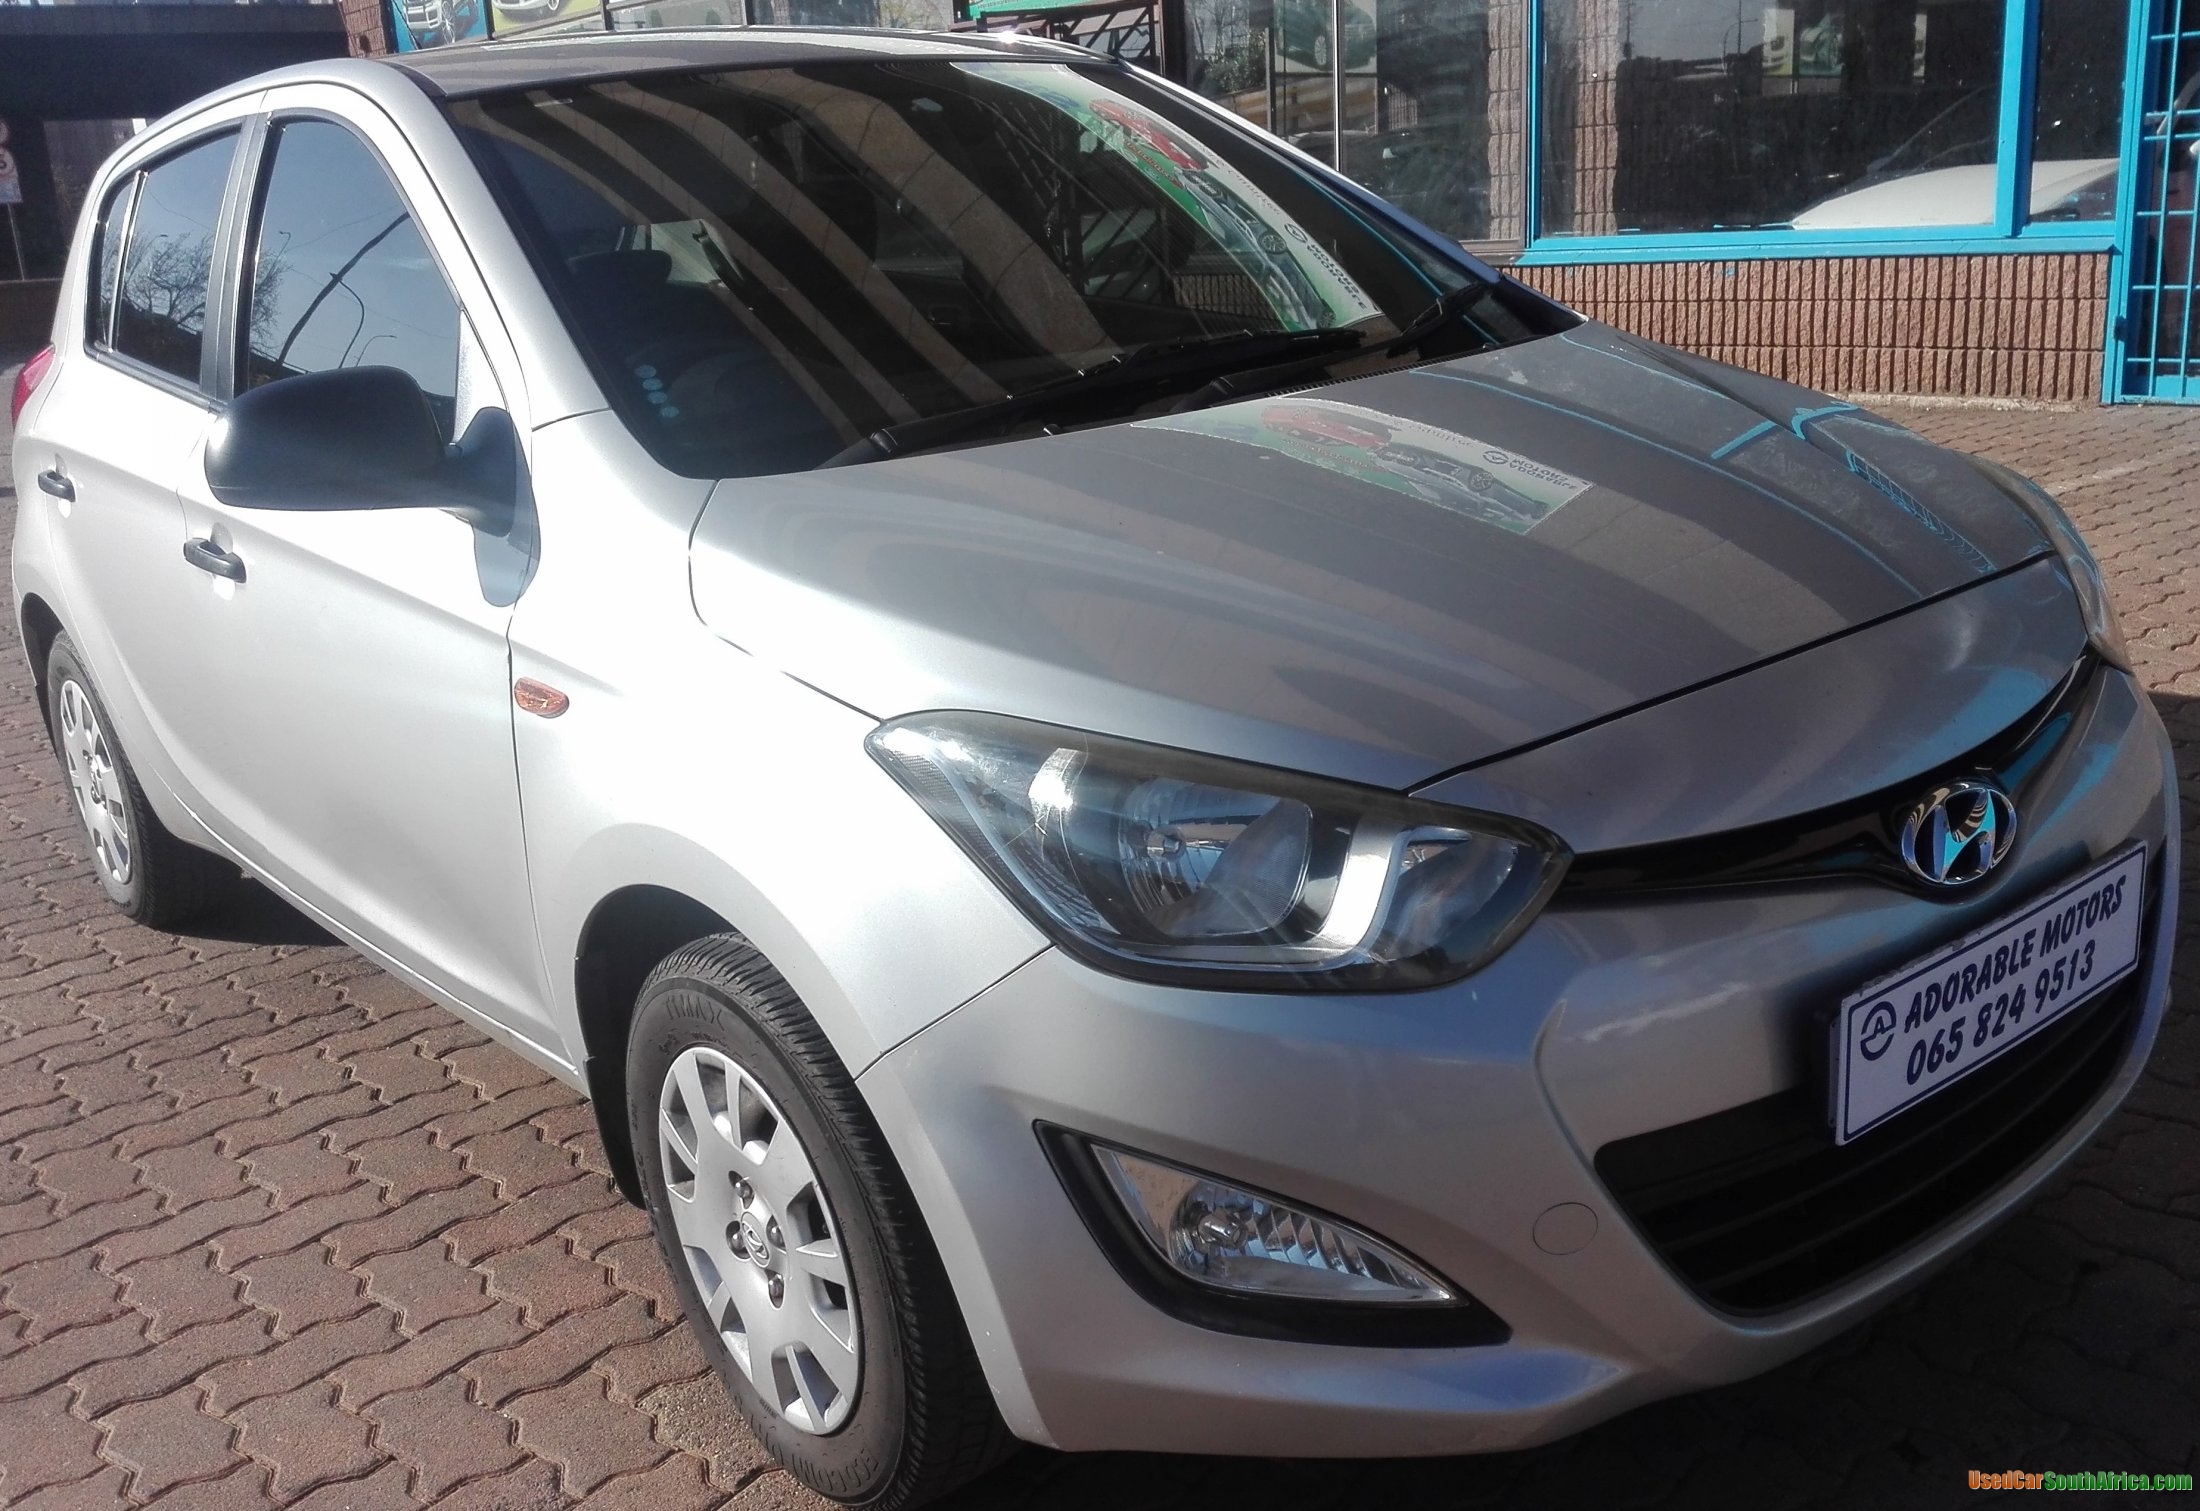 2013 Hyundai I20 1.4 Hatchback used car for sale in Johannesburg City Gauteng South Africa - OnlyCars.co.za